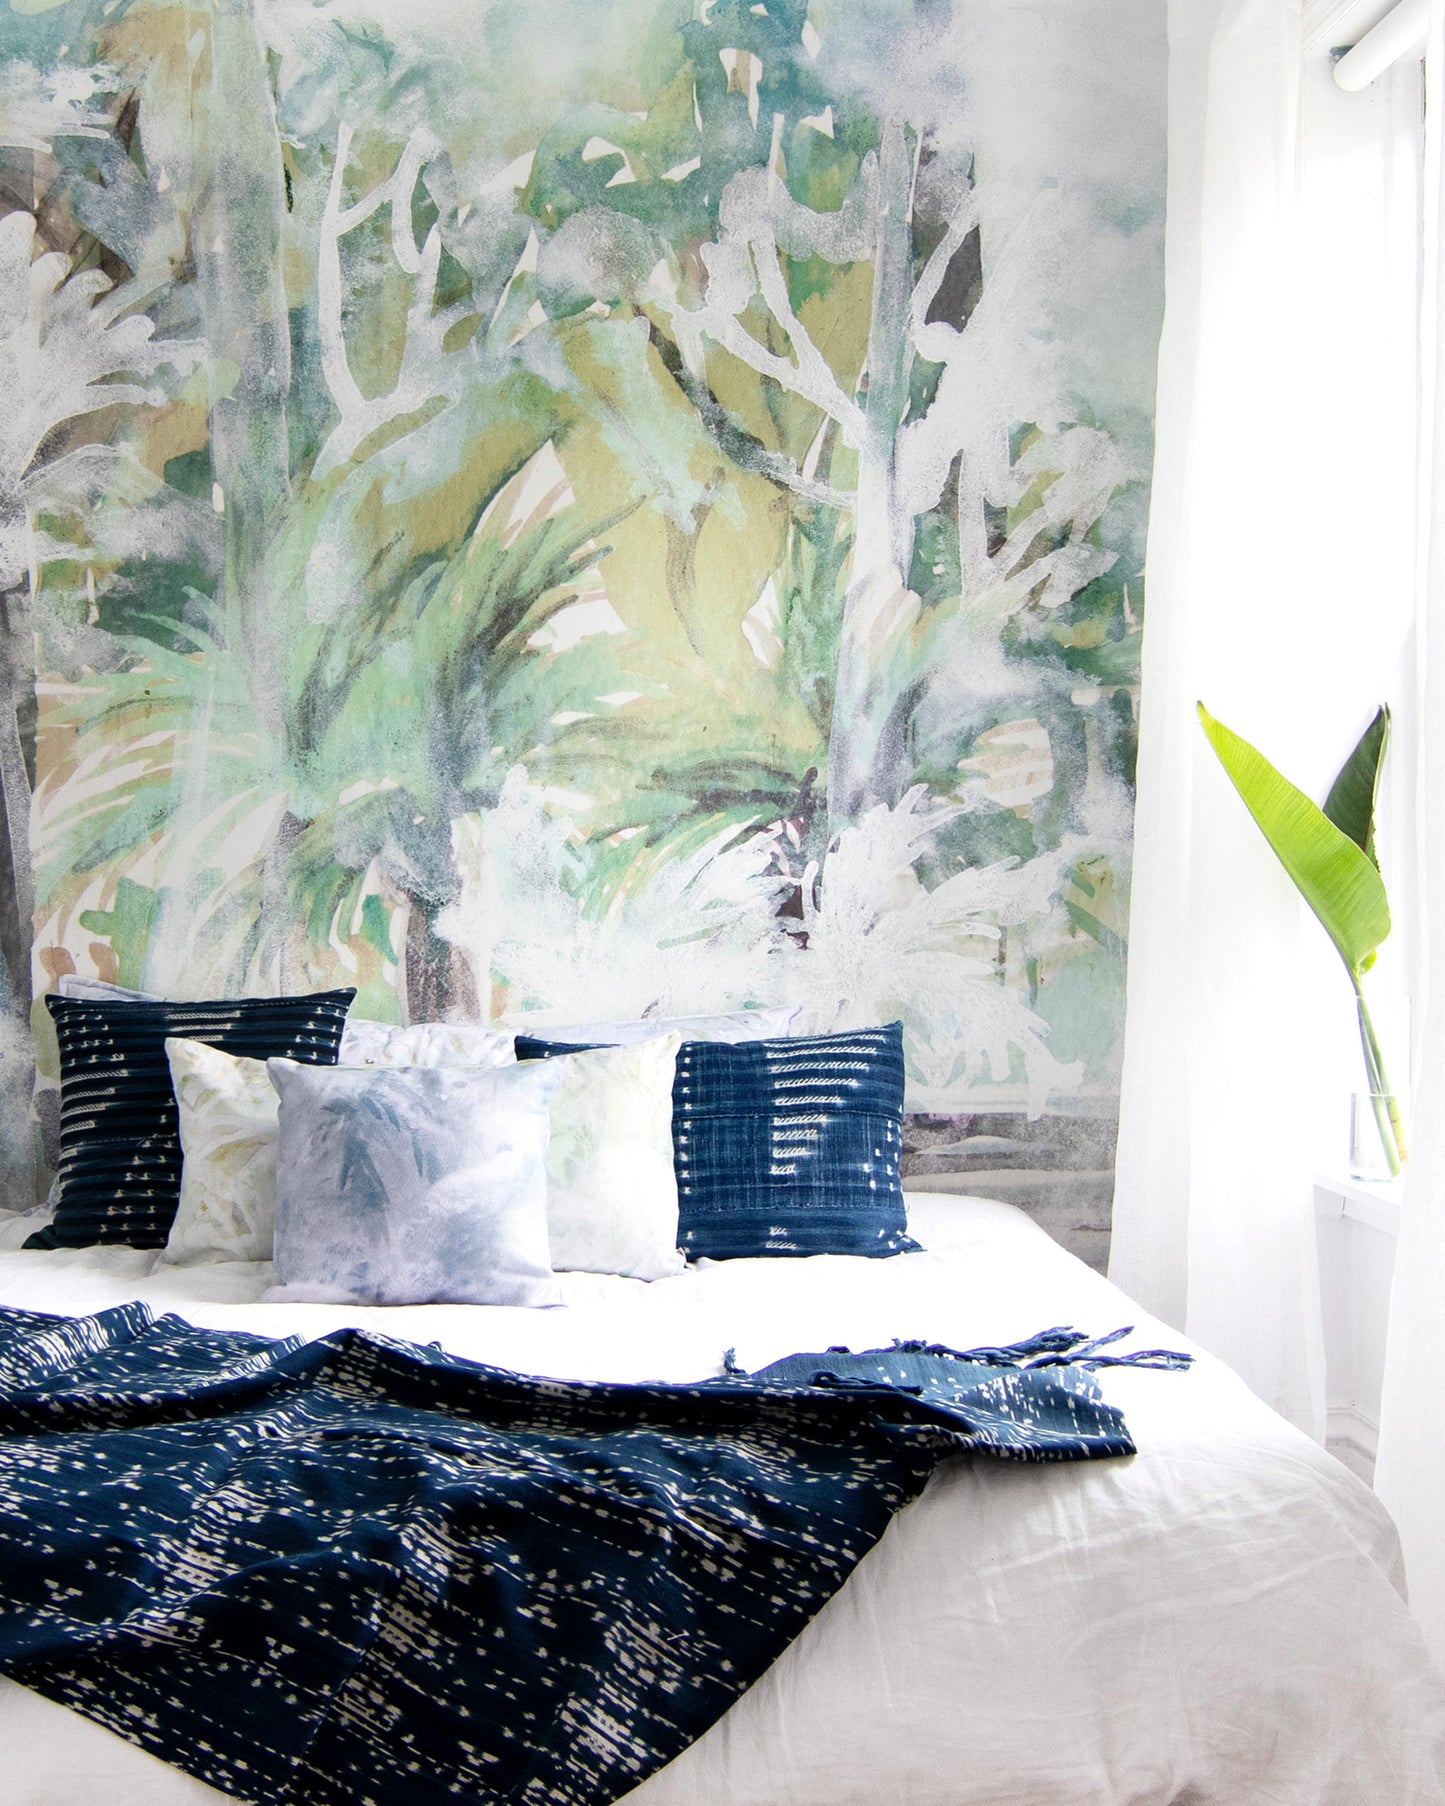 A bedroom with a large mural, Regalo di Dio Wallpaper Mural Verde, on the wall